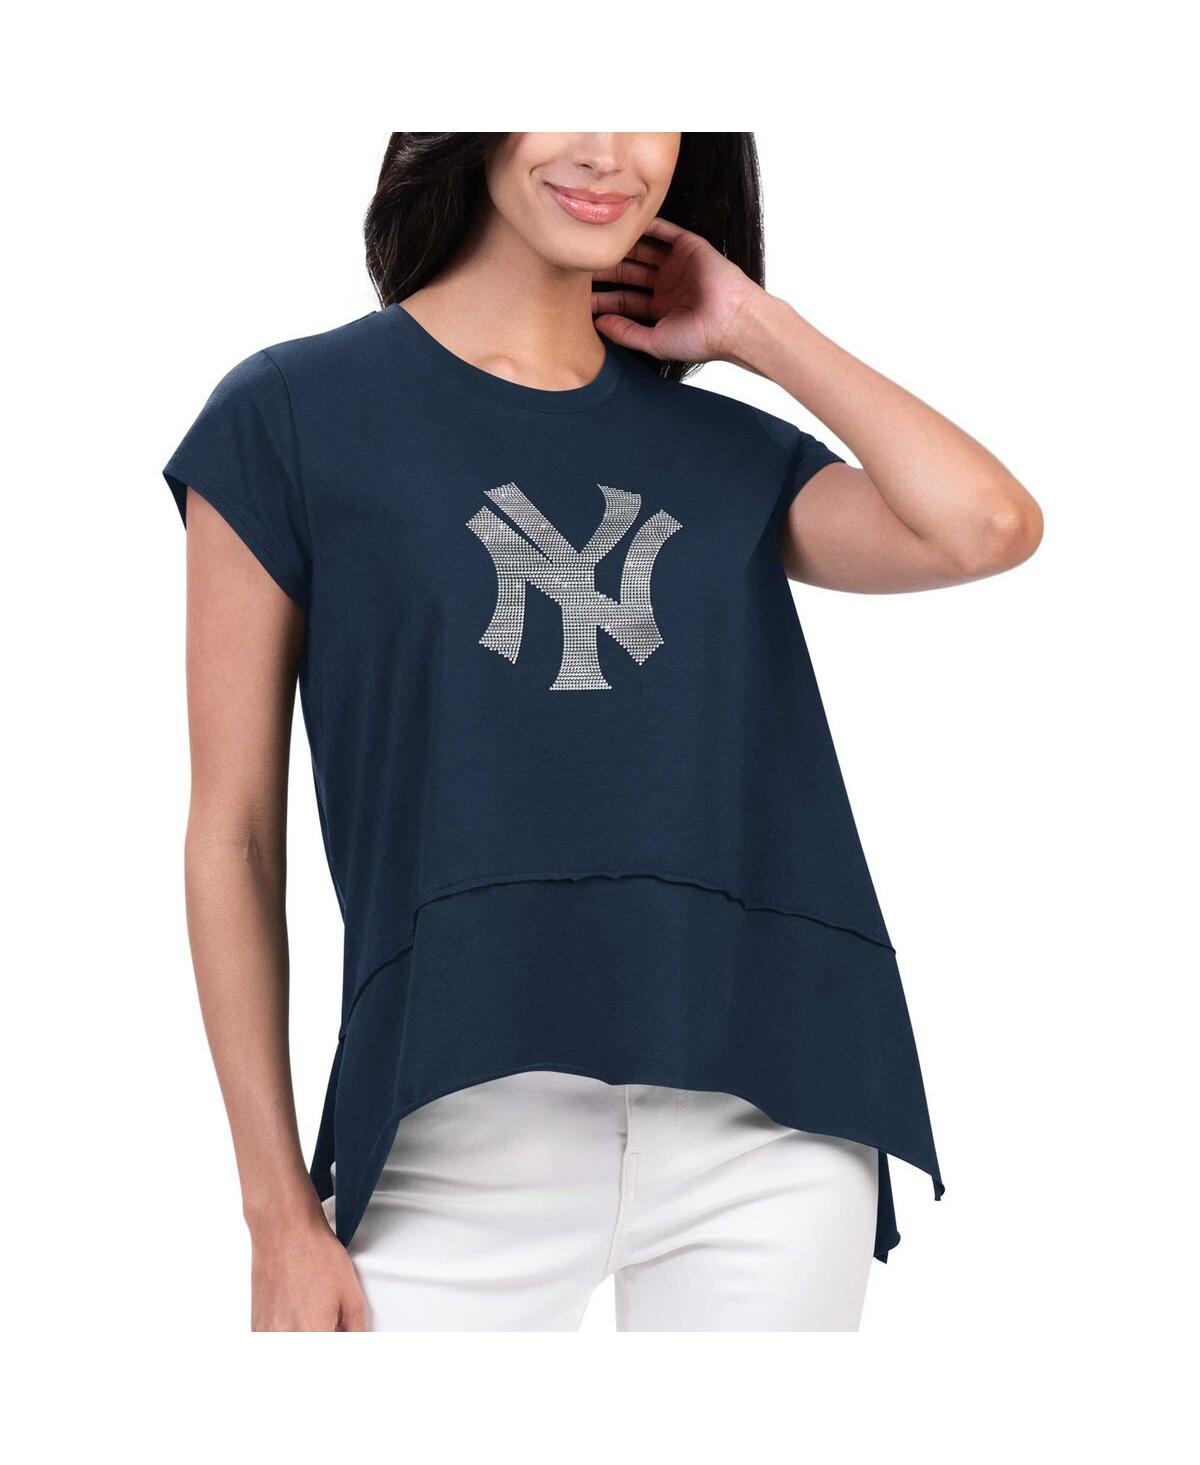 G-III 4HER BY CARL BANKS WOMEN'S G-III 4HER BY CARL BANKS NAVY NEW YORK YANKEES CHEER FASHION T-SHIRT